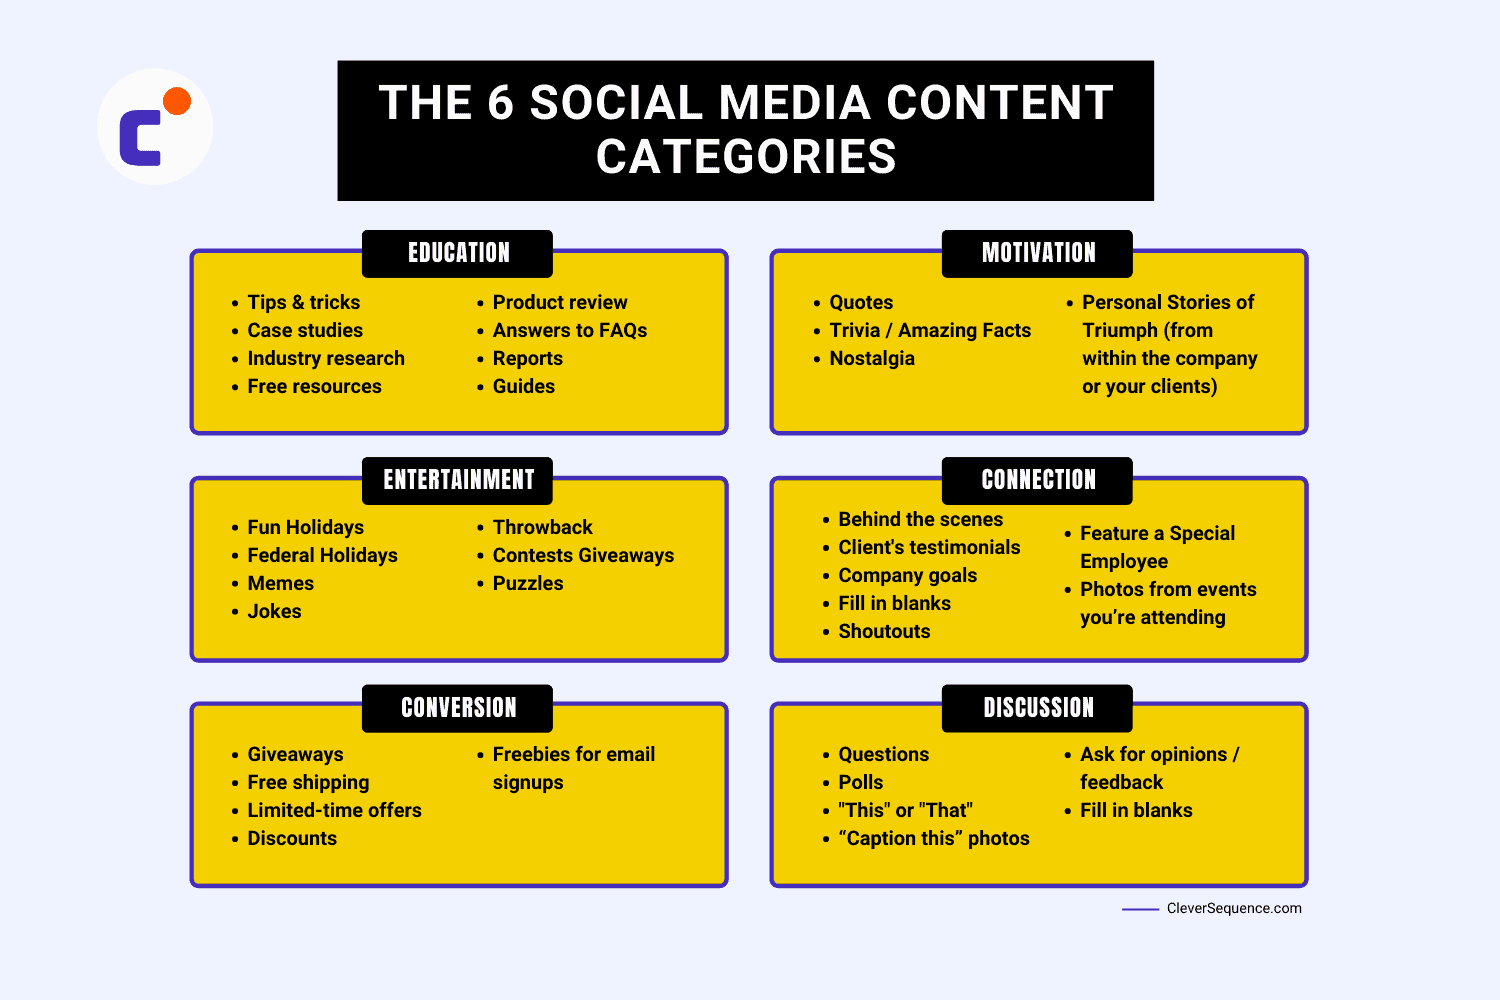 The 6 Social Media Categories in the importance of social media